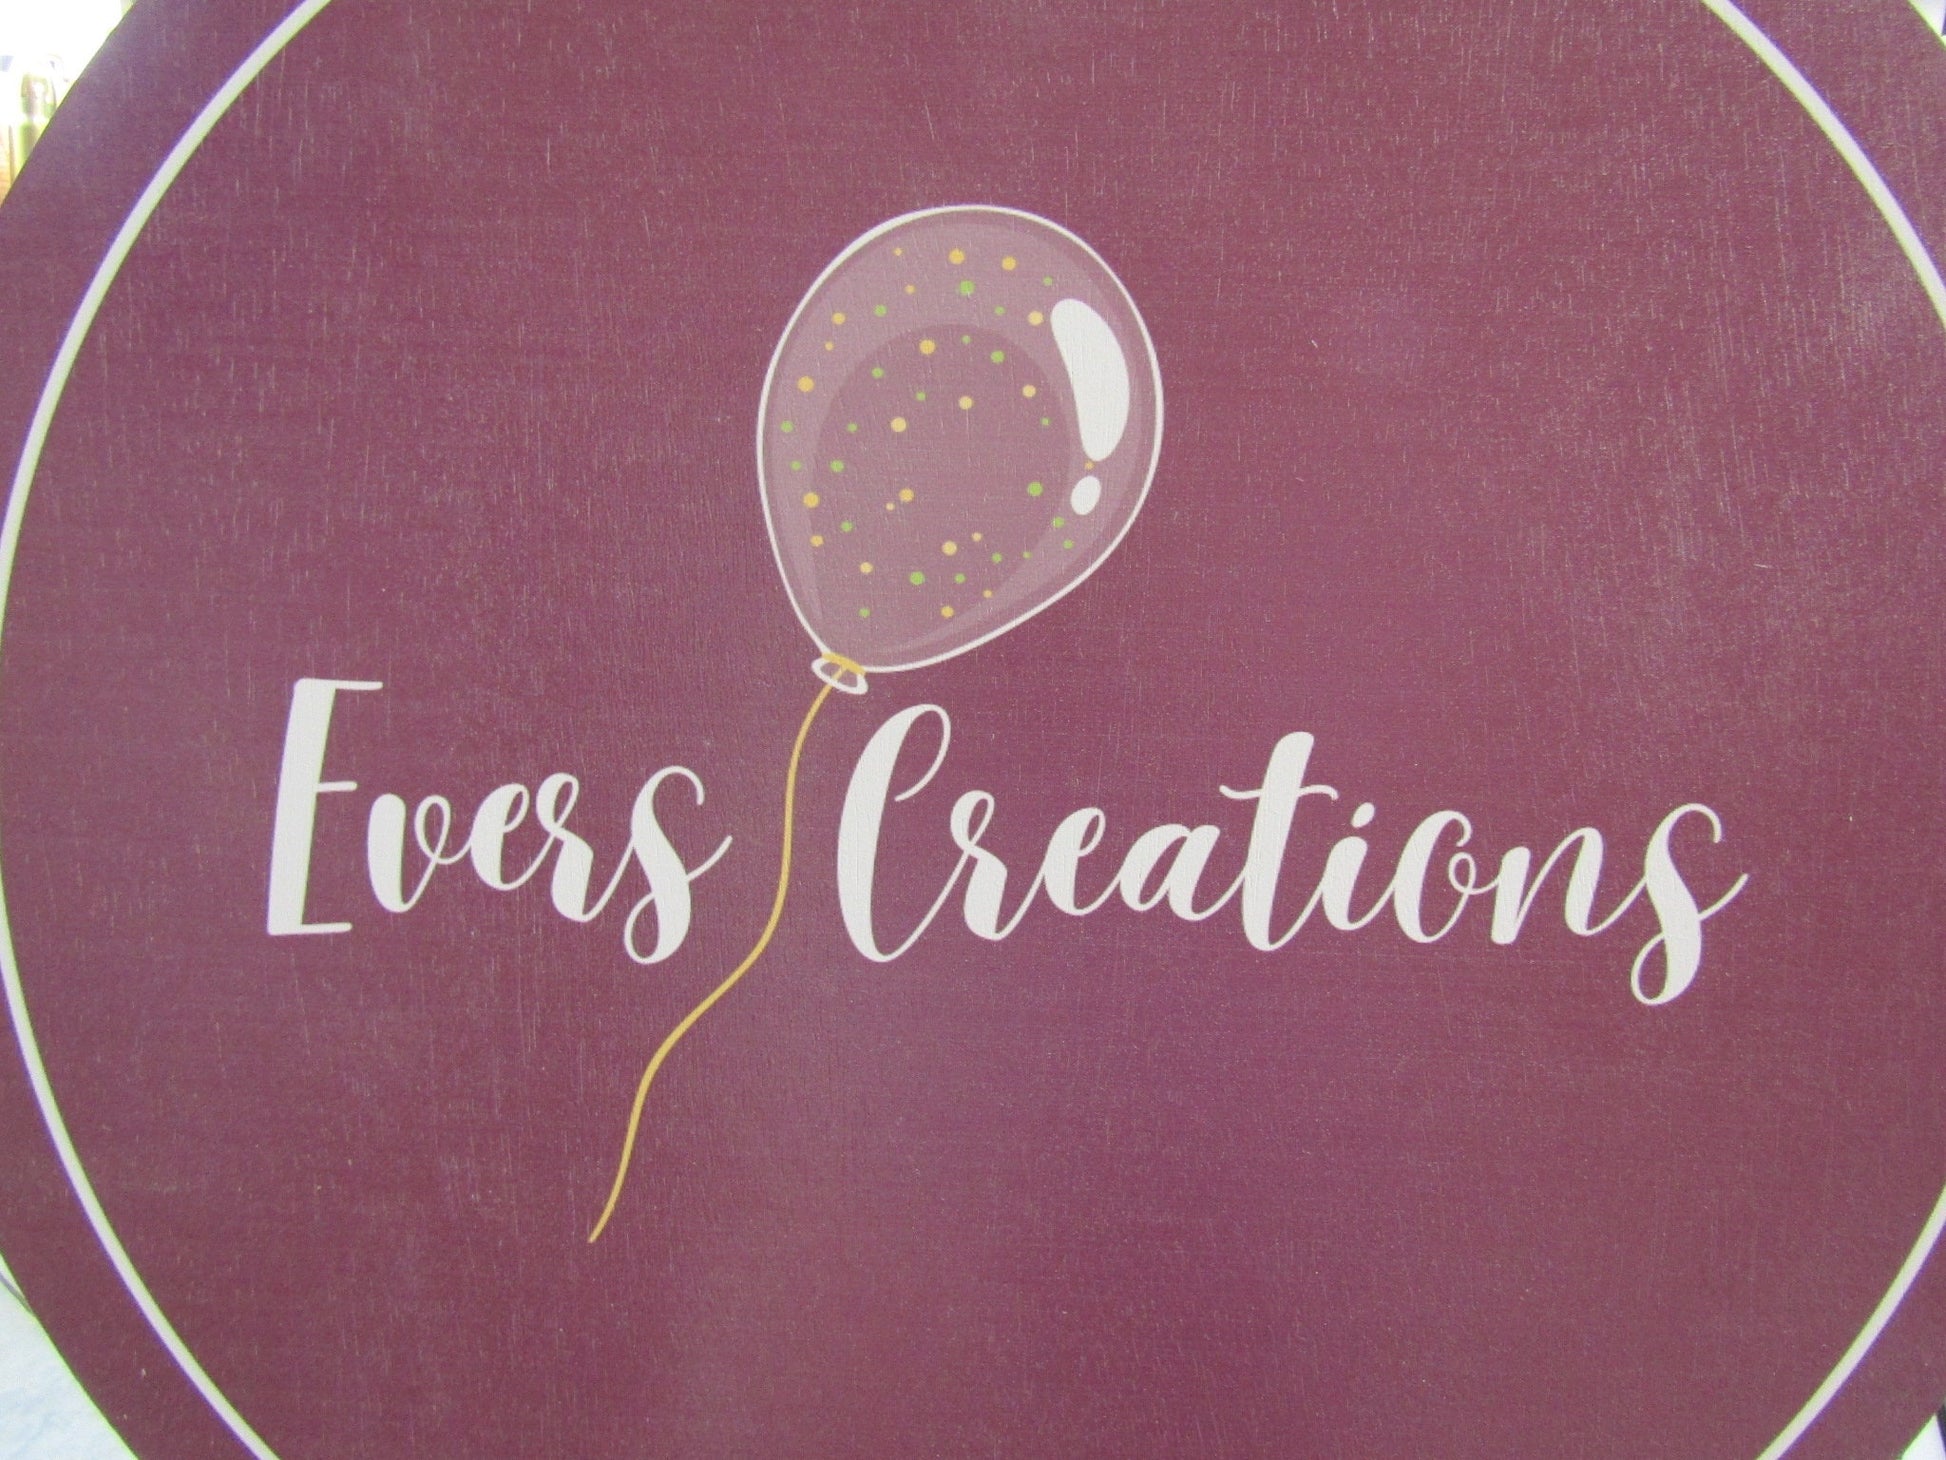 Custom Color Printed Wooden Door Hanging Sign Booth Vendor Sign Balloon Company Party Creations Your Logo Pink Personalized Small Business